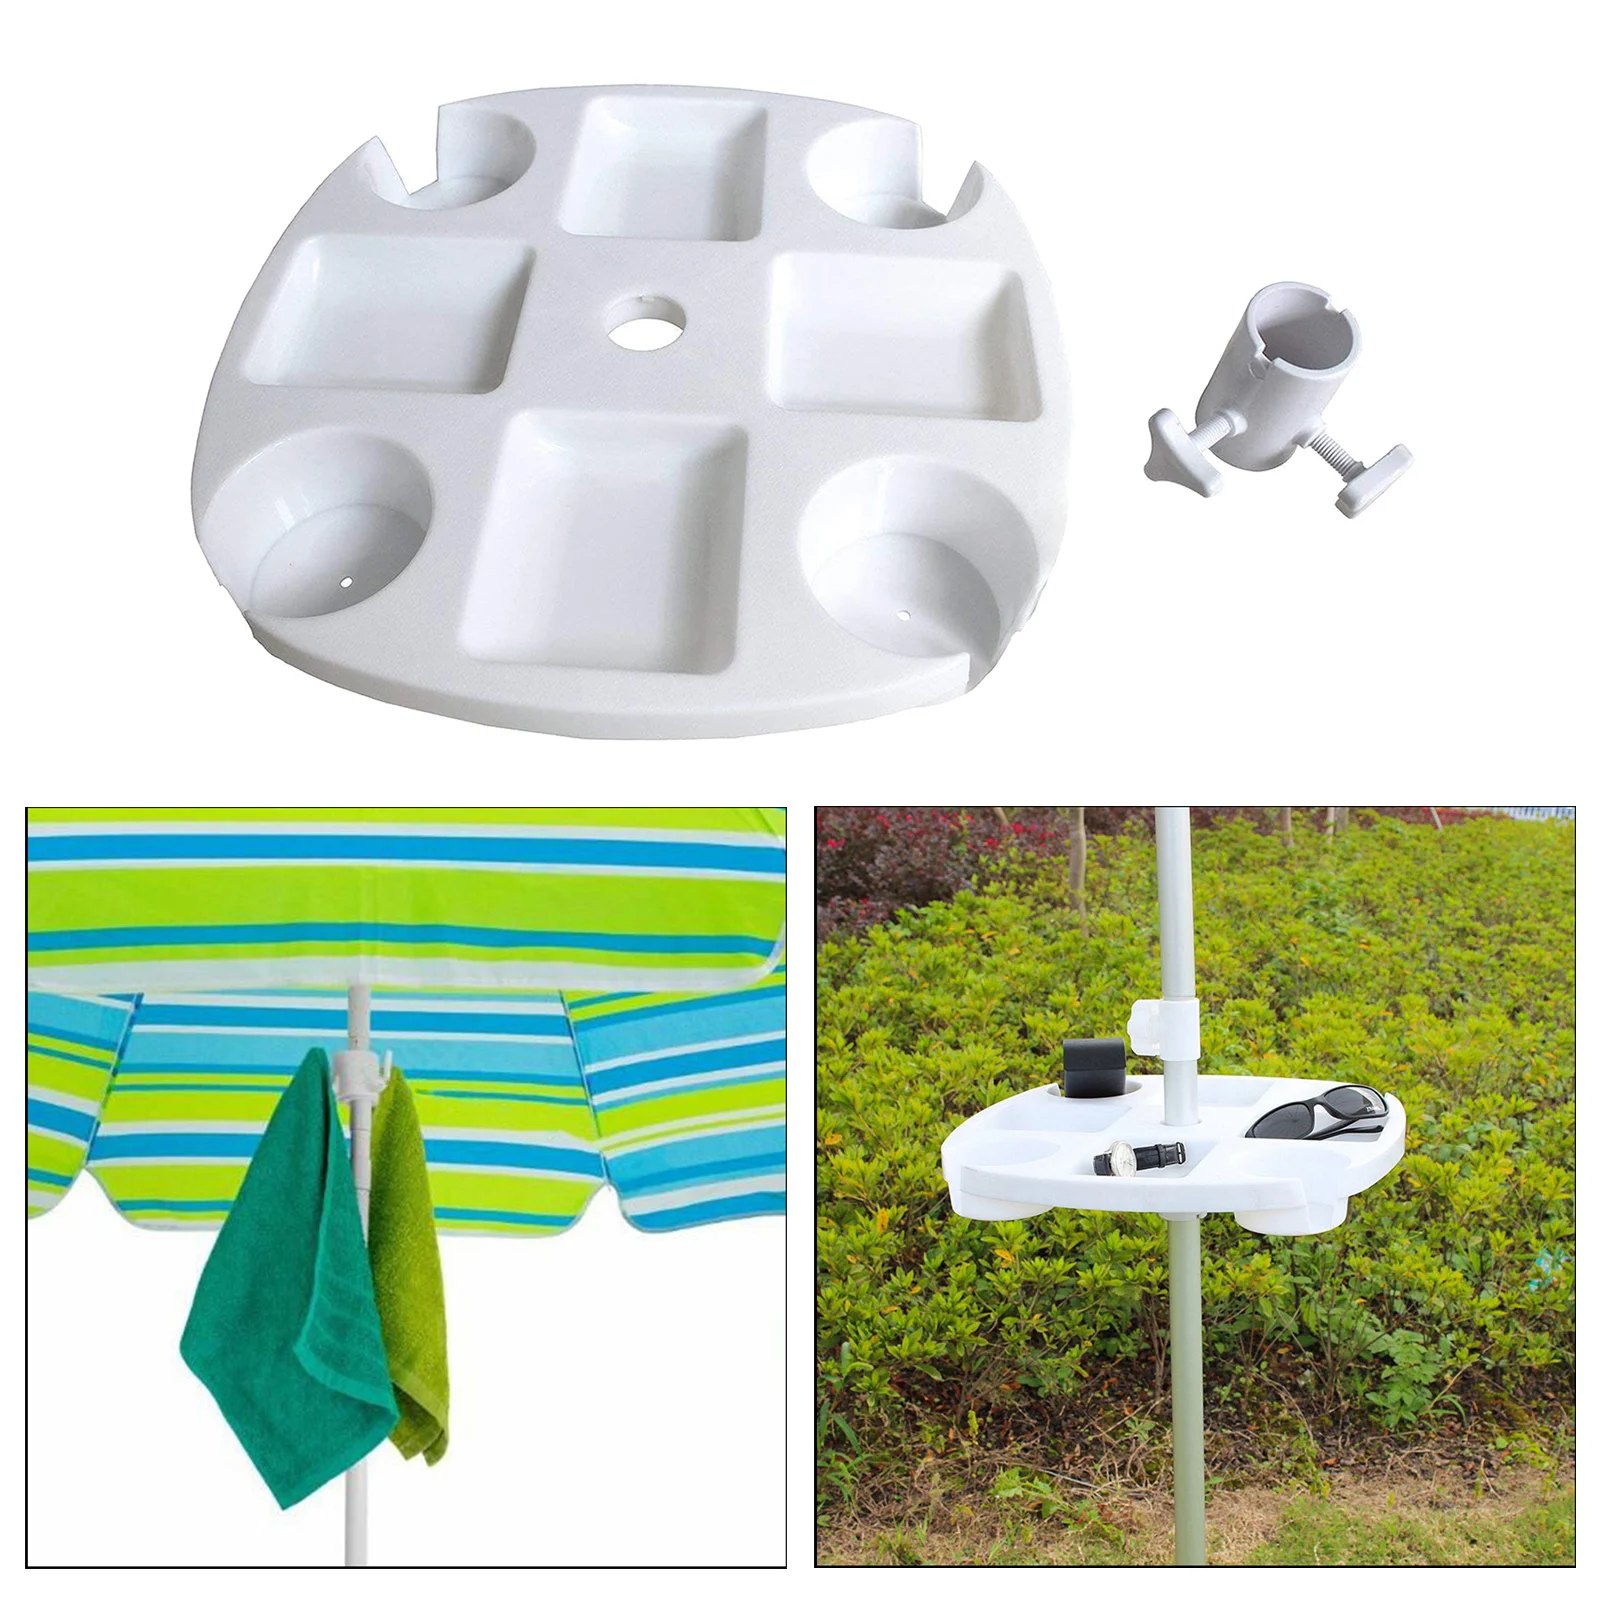 Outdoor Beach Umbrella Table Tray Snack Drink Holder with Towl Hats Hanging Hook for Beach Patio Garden White